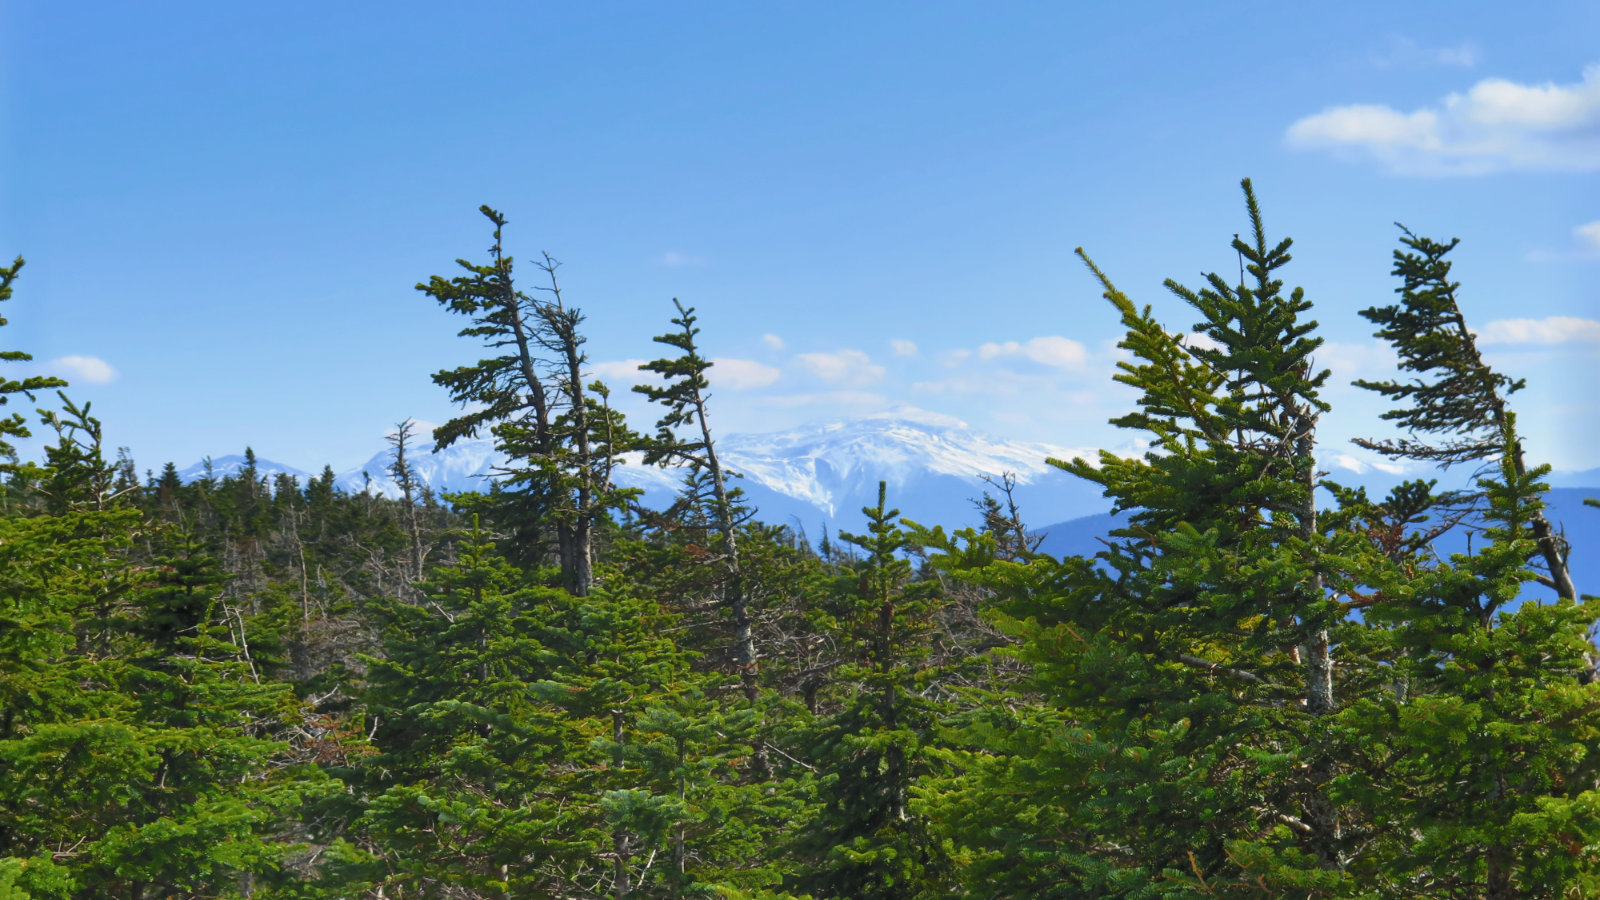 Cabot-Presidentials-View-20190320